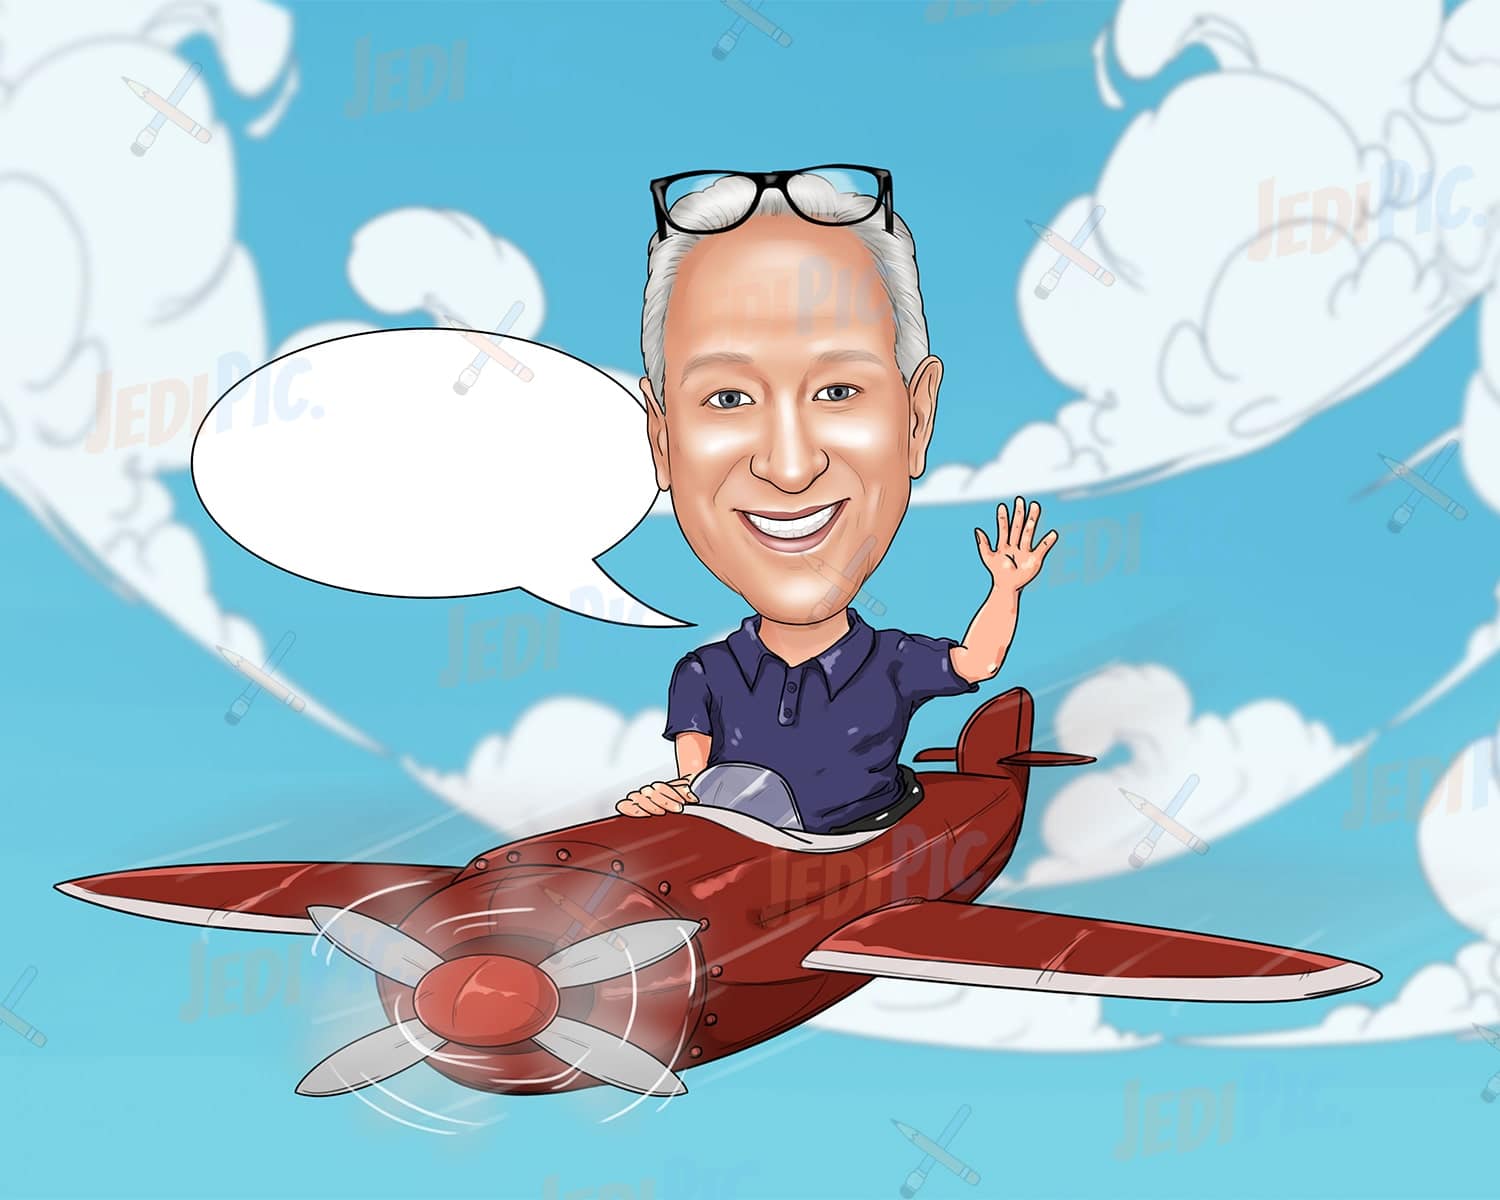 Plane Caricature - Man on Airplane in Digital Style